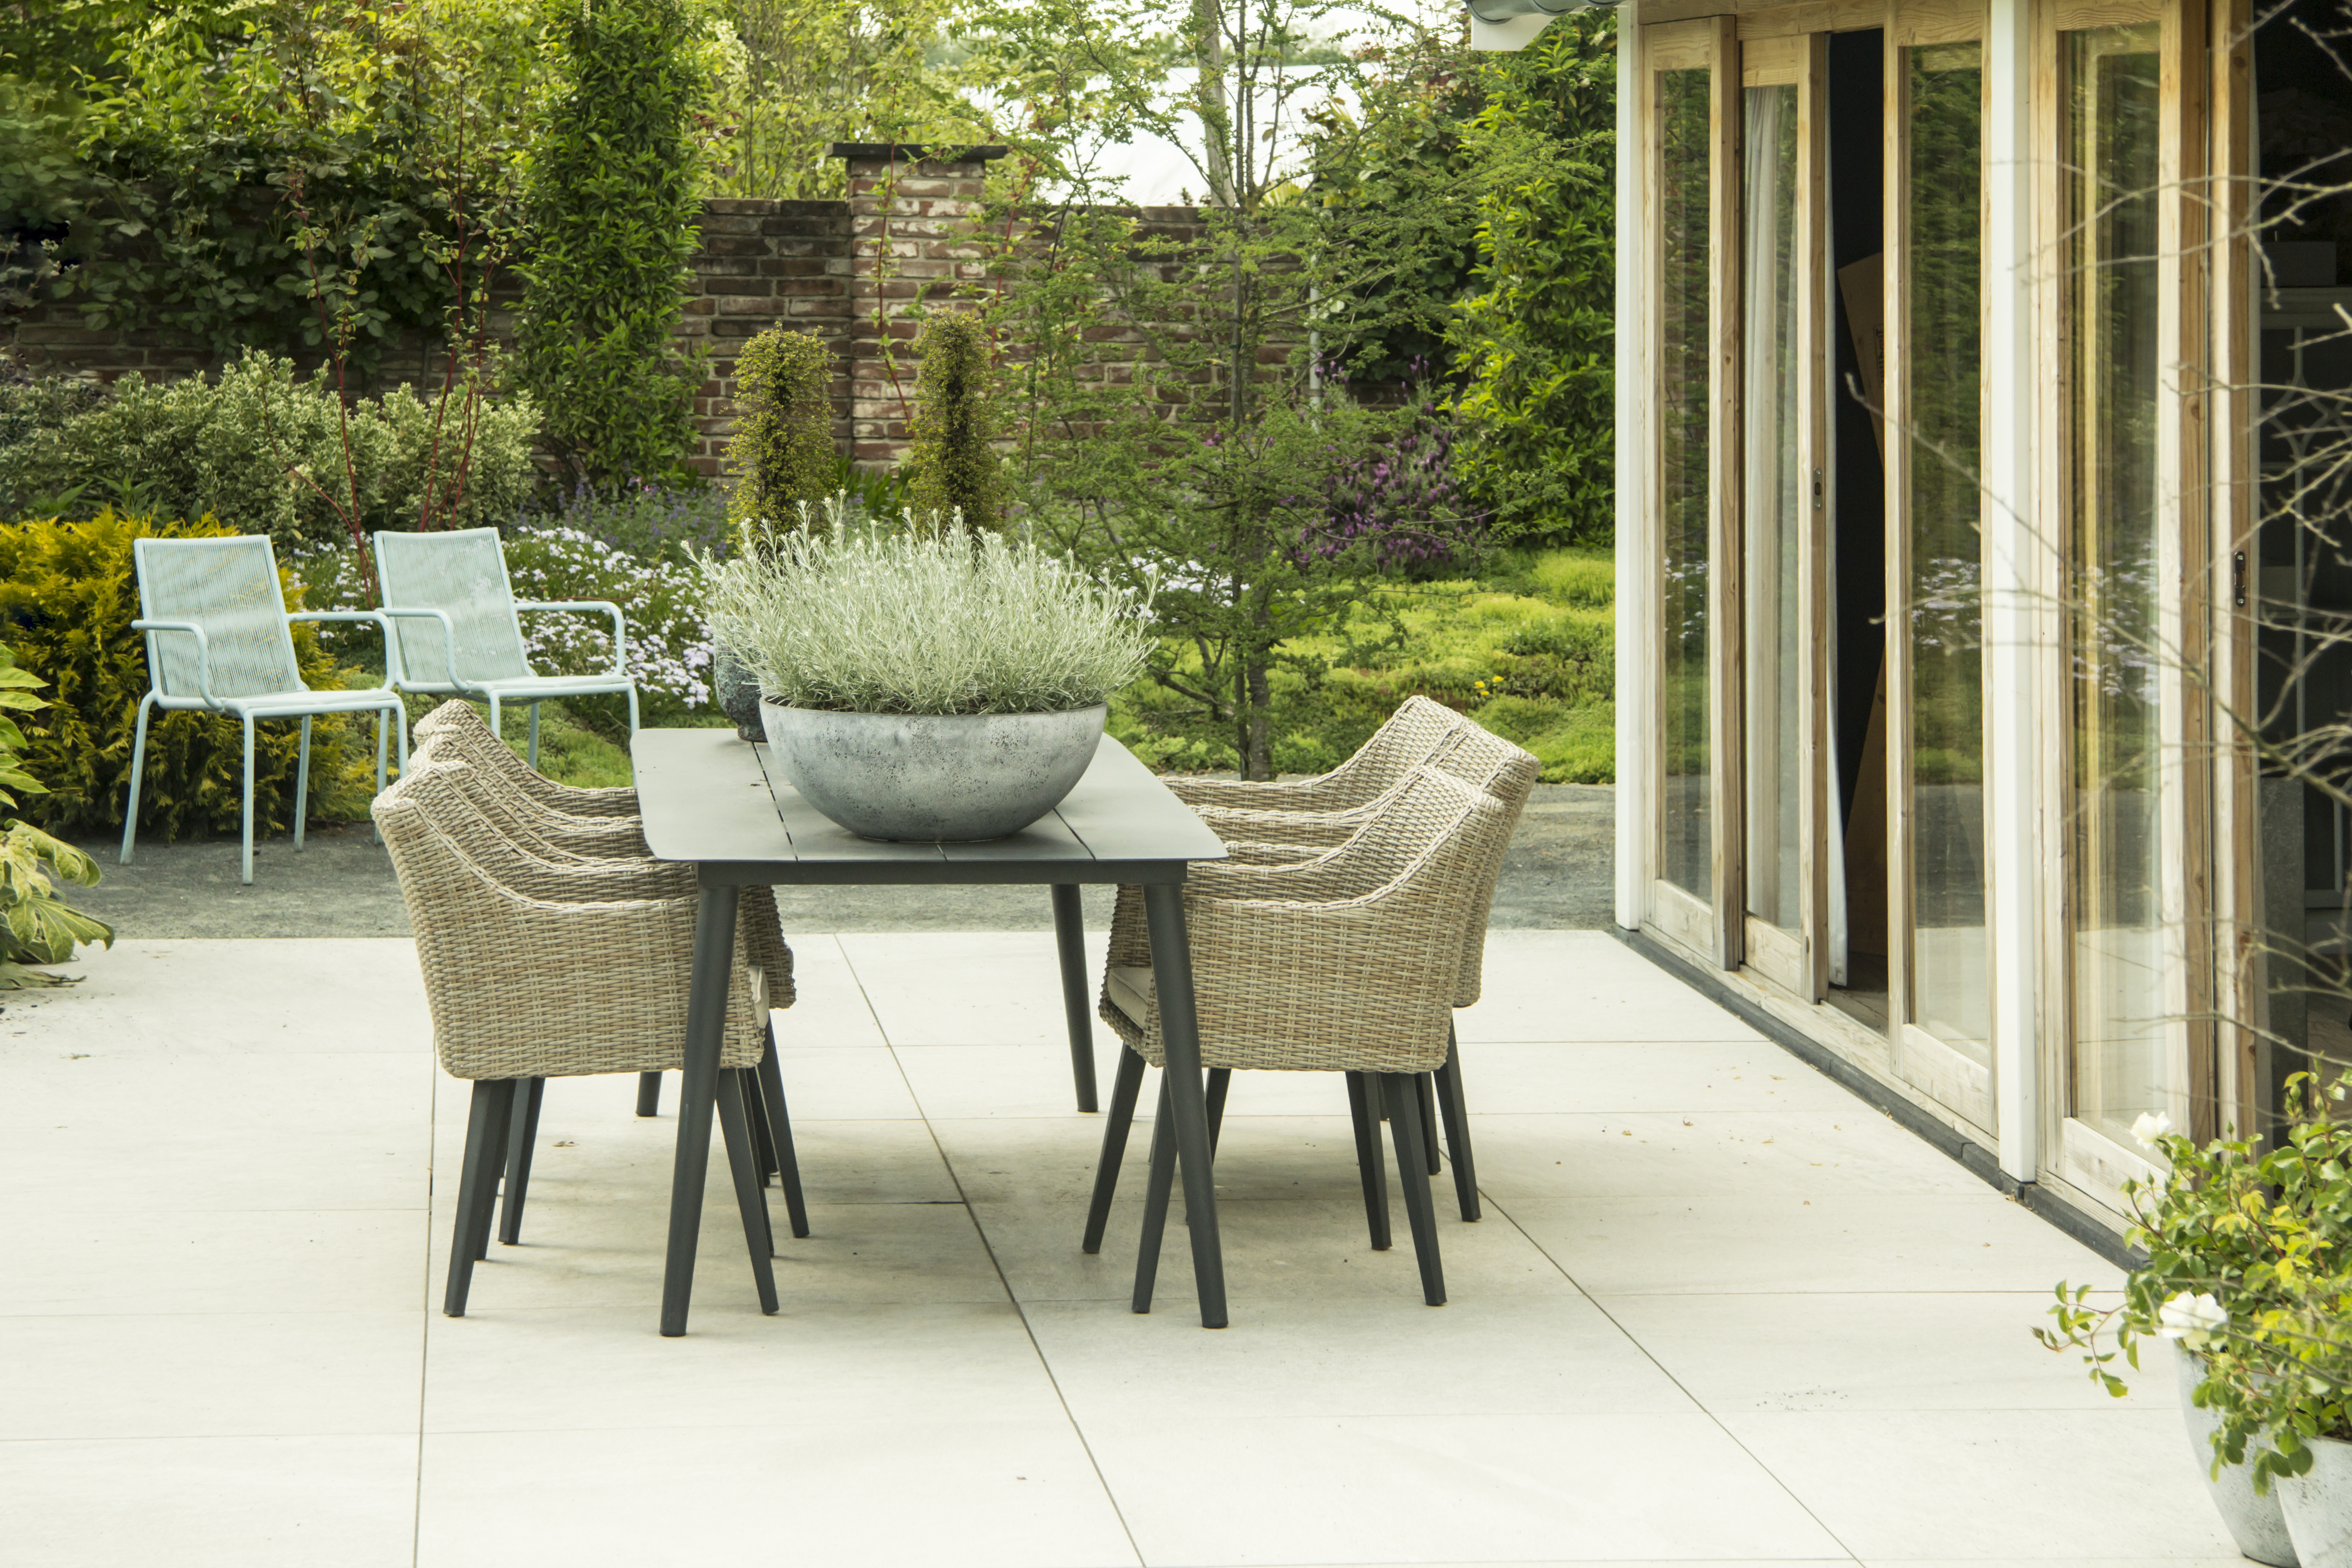 Make use of a patio by adding outdoor funiture